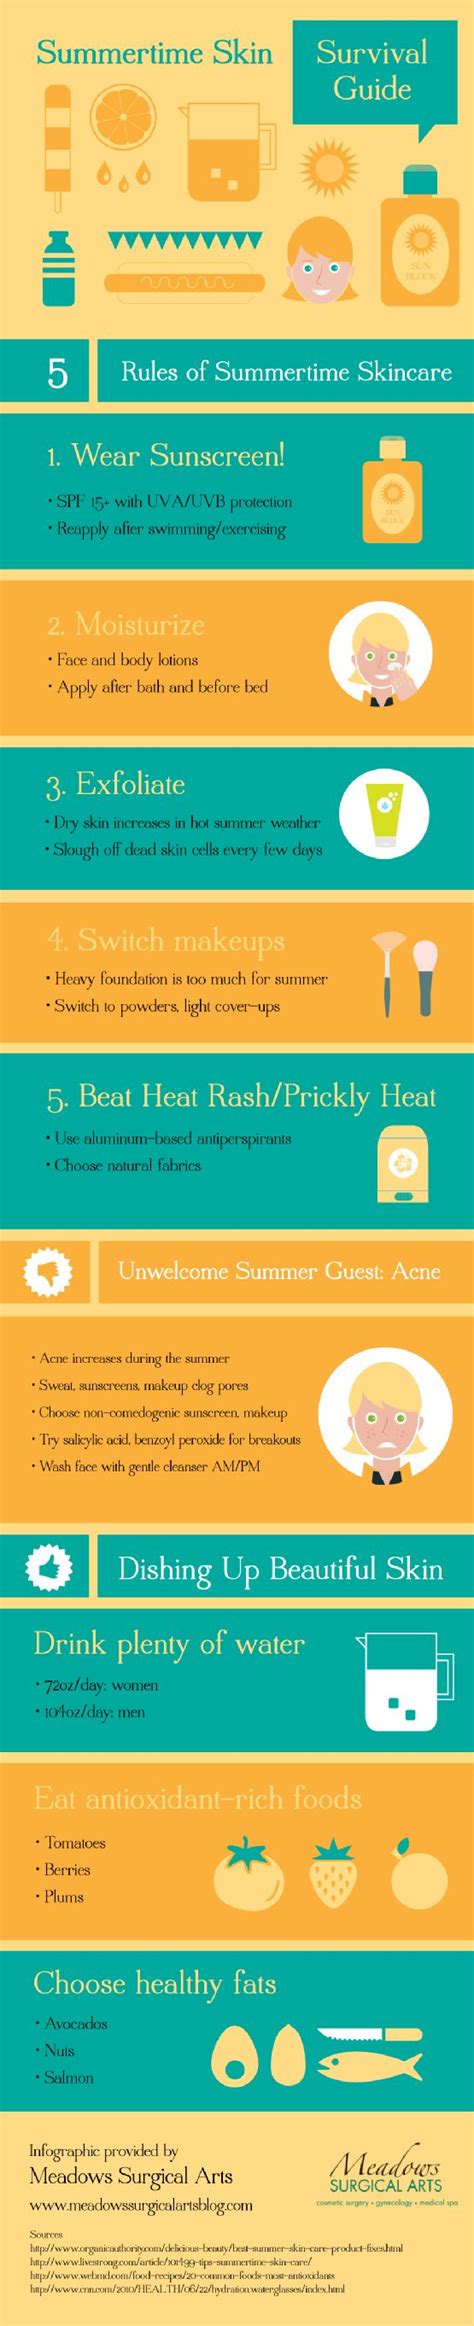 5 Ways To Maintain A Proper Summer Skin Care Routine Infographic